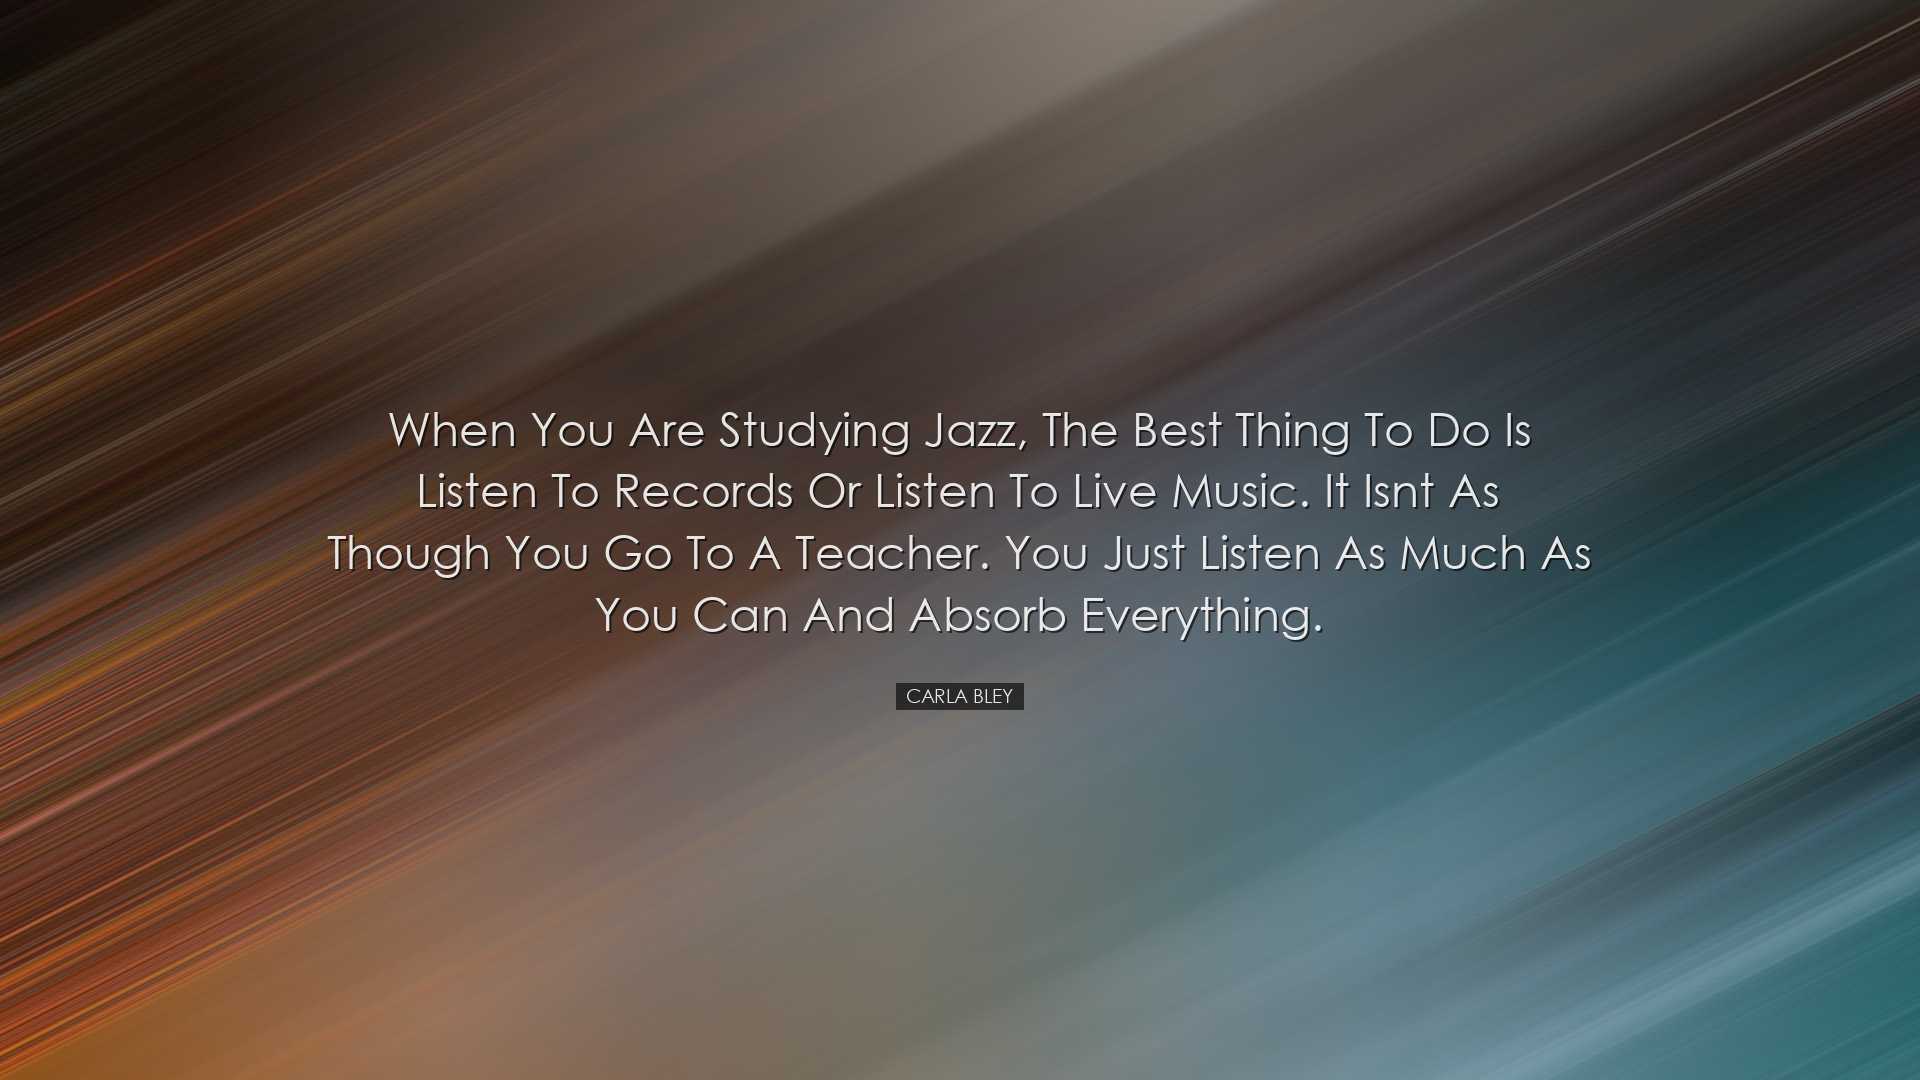 When you are studying jazz, the best thing to do is listen to reco